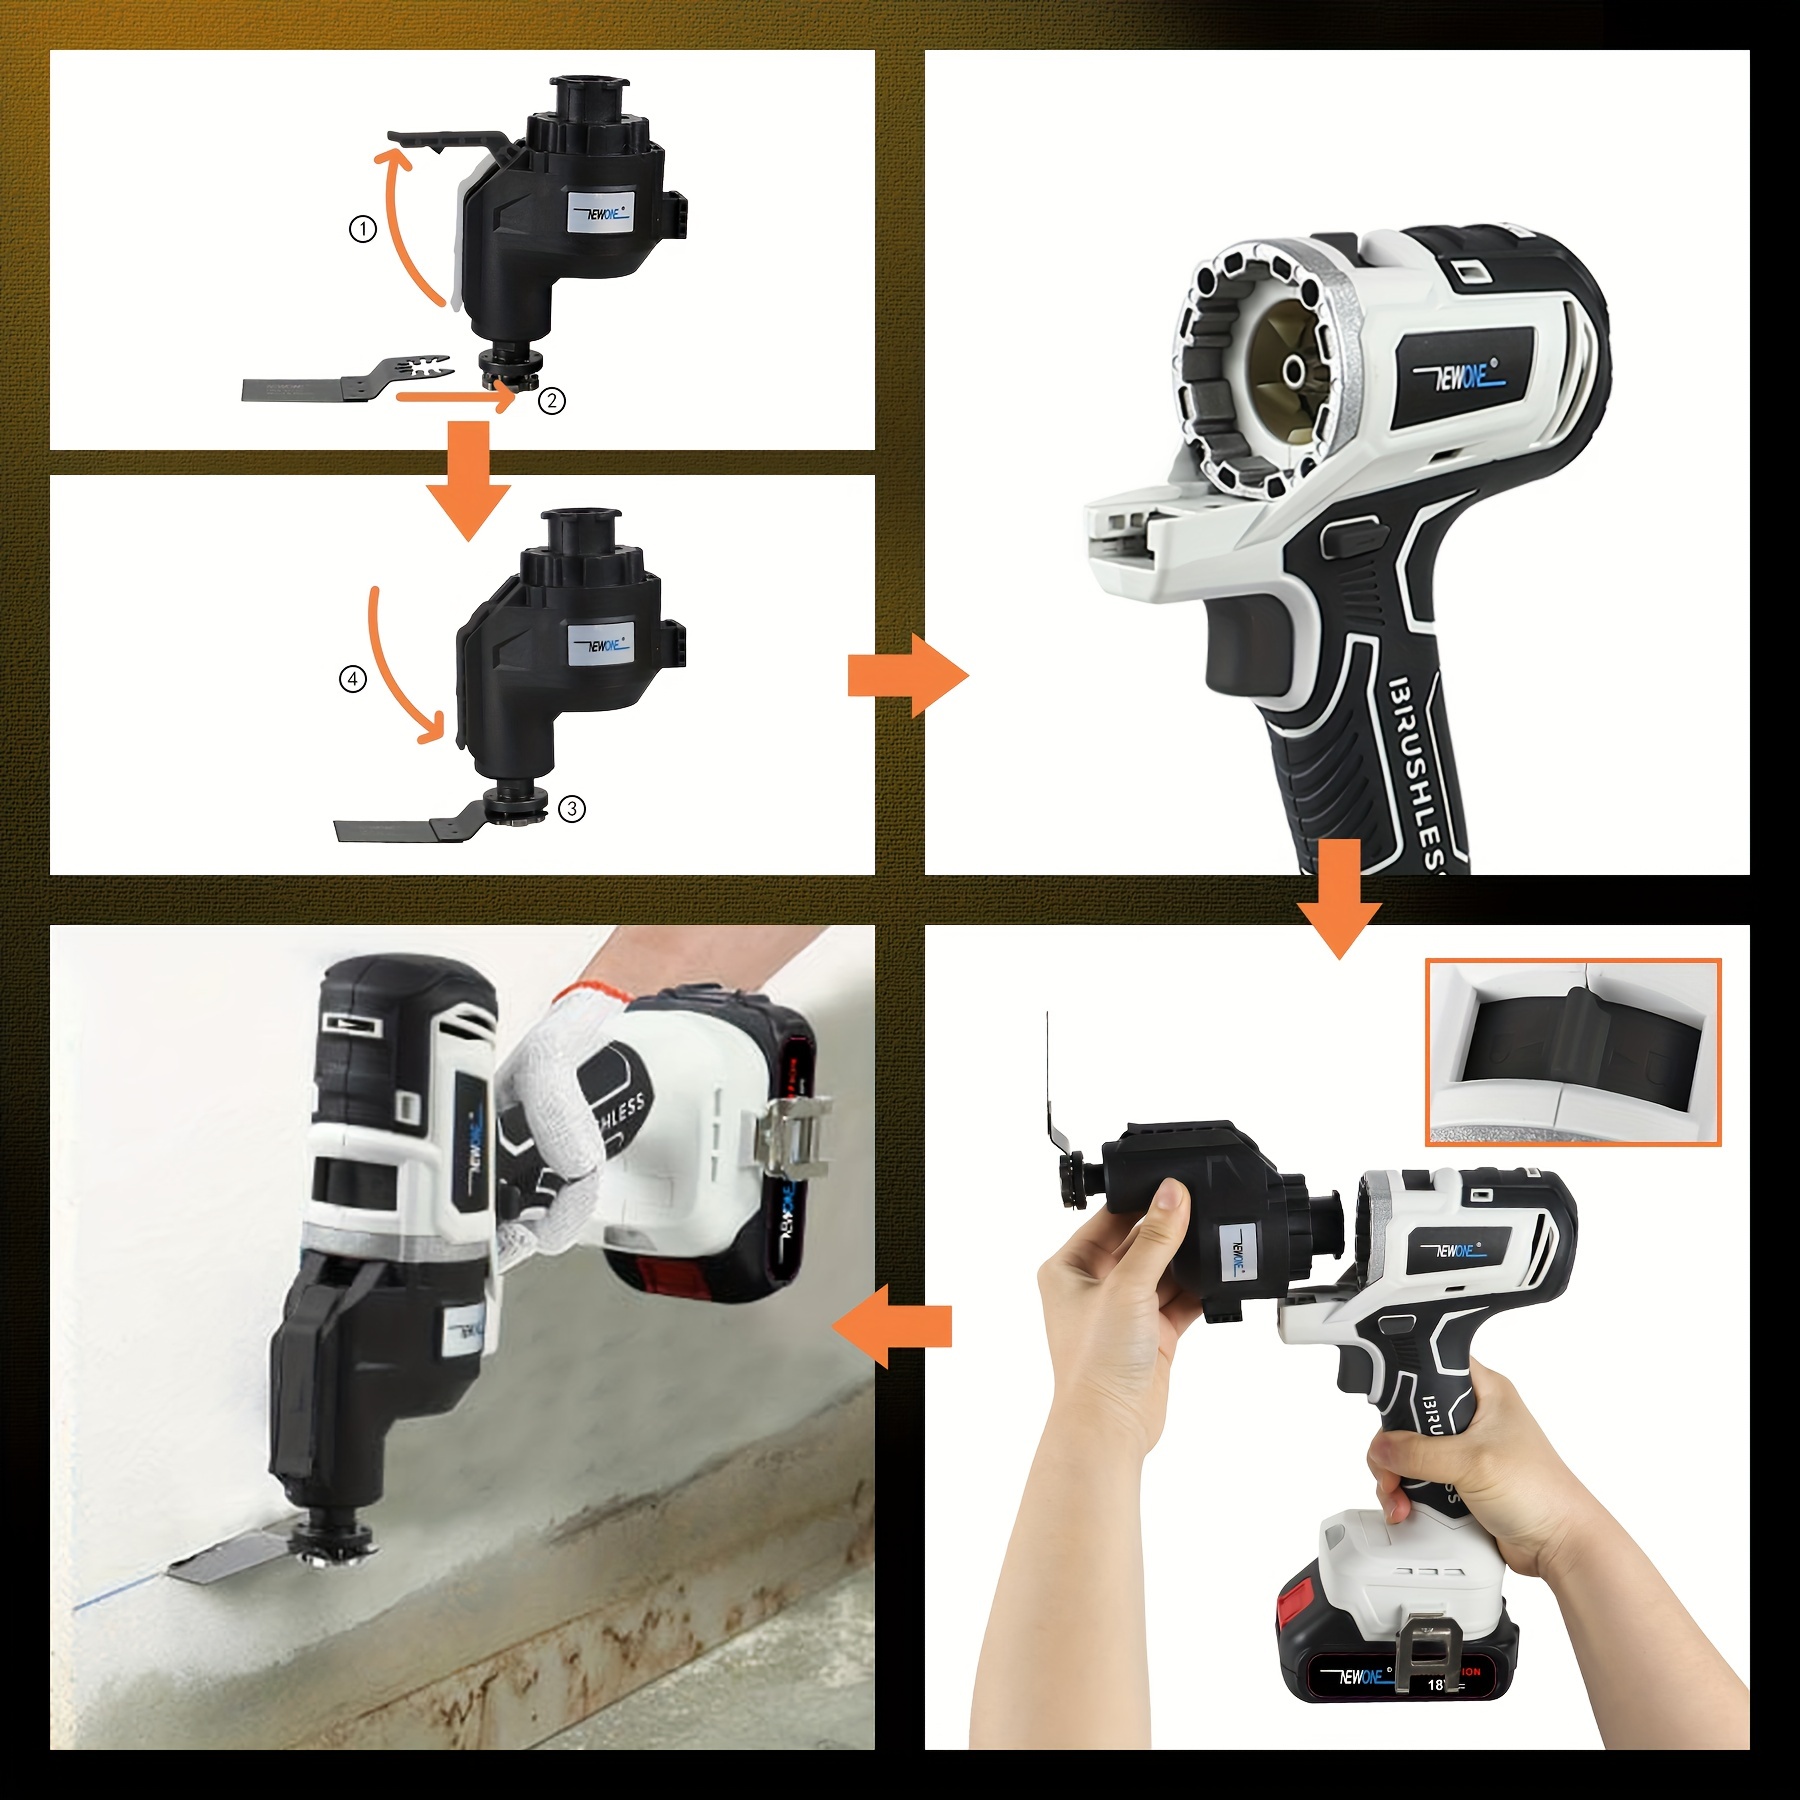 18v Brushless Quick Release Oscillating Tool, Circular Saw